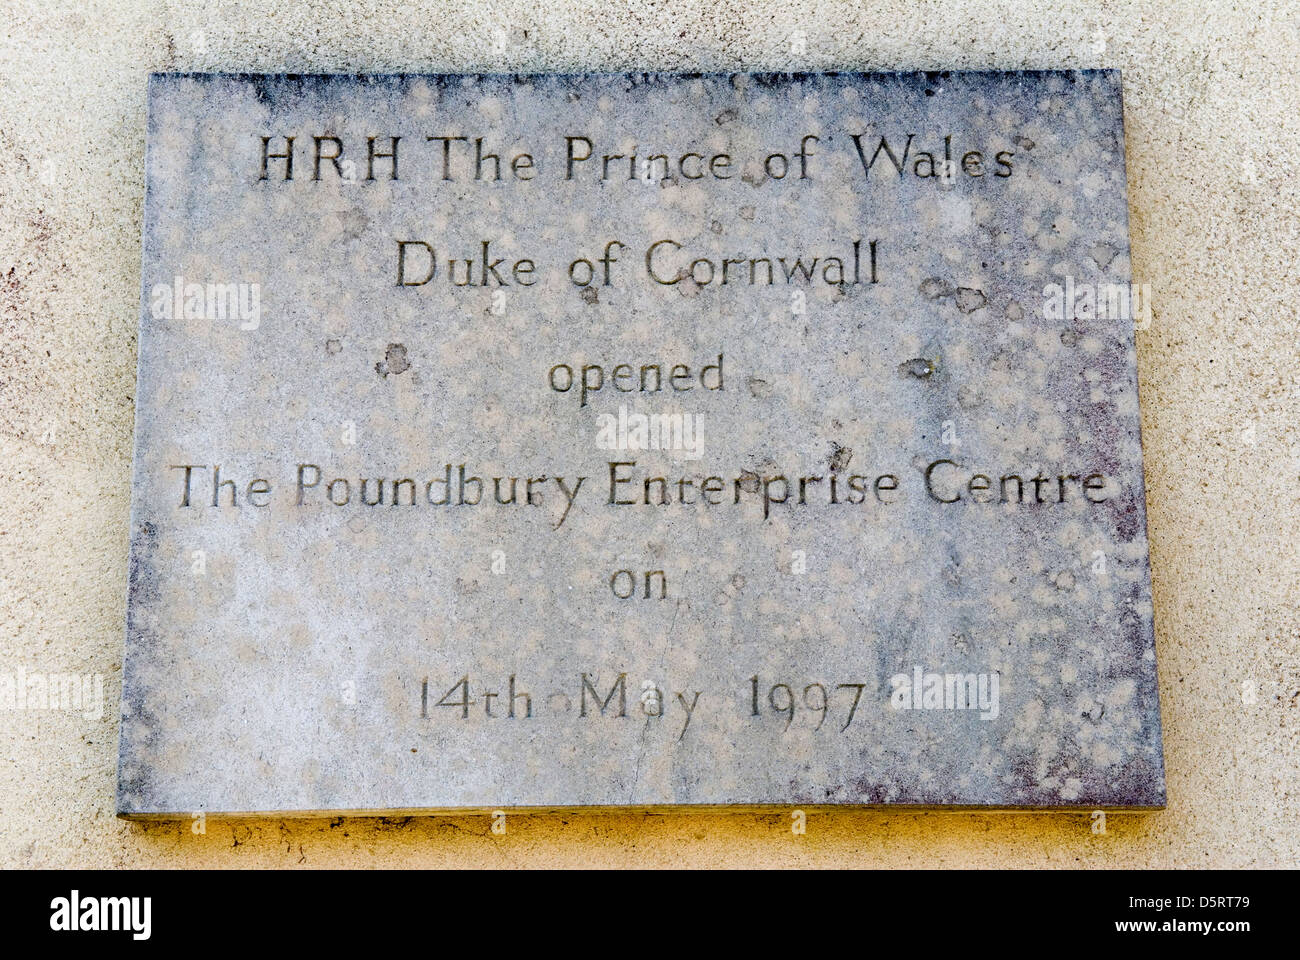 Poundbury Village a new town development on the Duchy of Cornwall Estate. HRH The Prince of Wales Duke of Cornwall opened The Poundbury Enterprise Centre 14th May 1997 plaque on building. Dorchester Dorset   2000s,  2013 UK HOMER SYKES Stock Photo